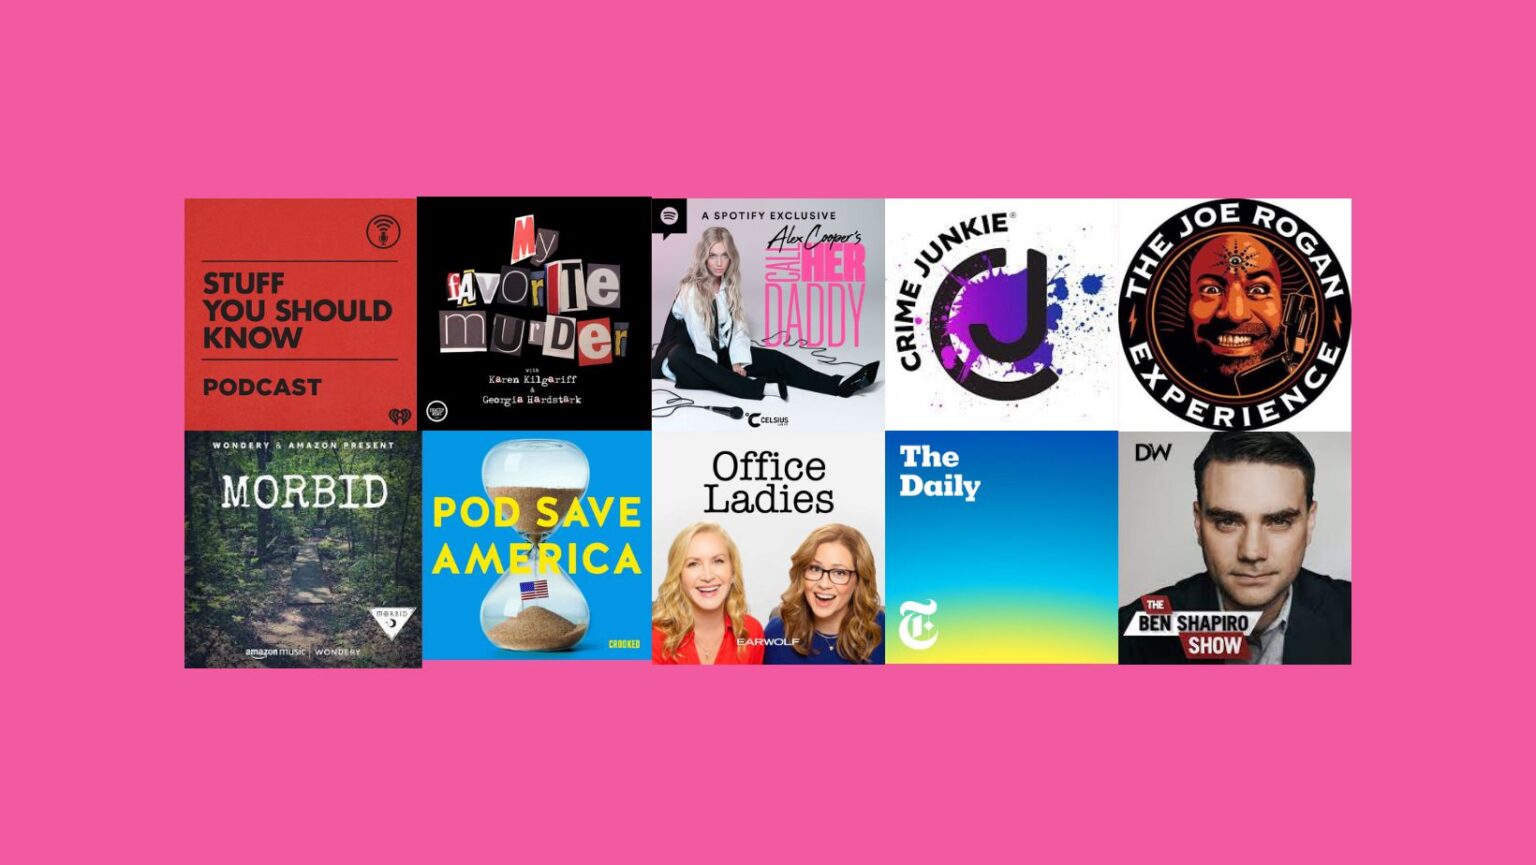 Top 10 Most Popular Podcasts on Spotify2023